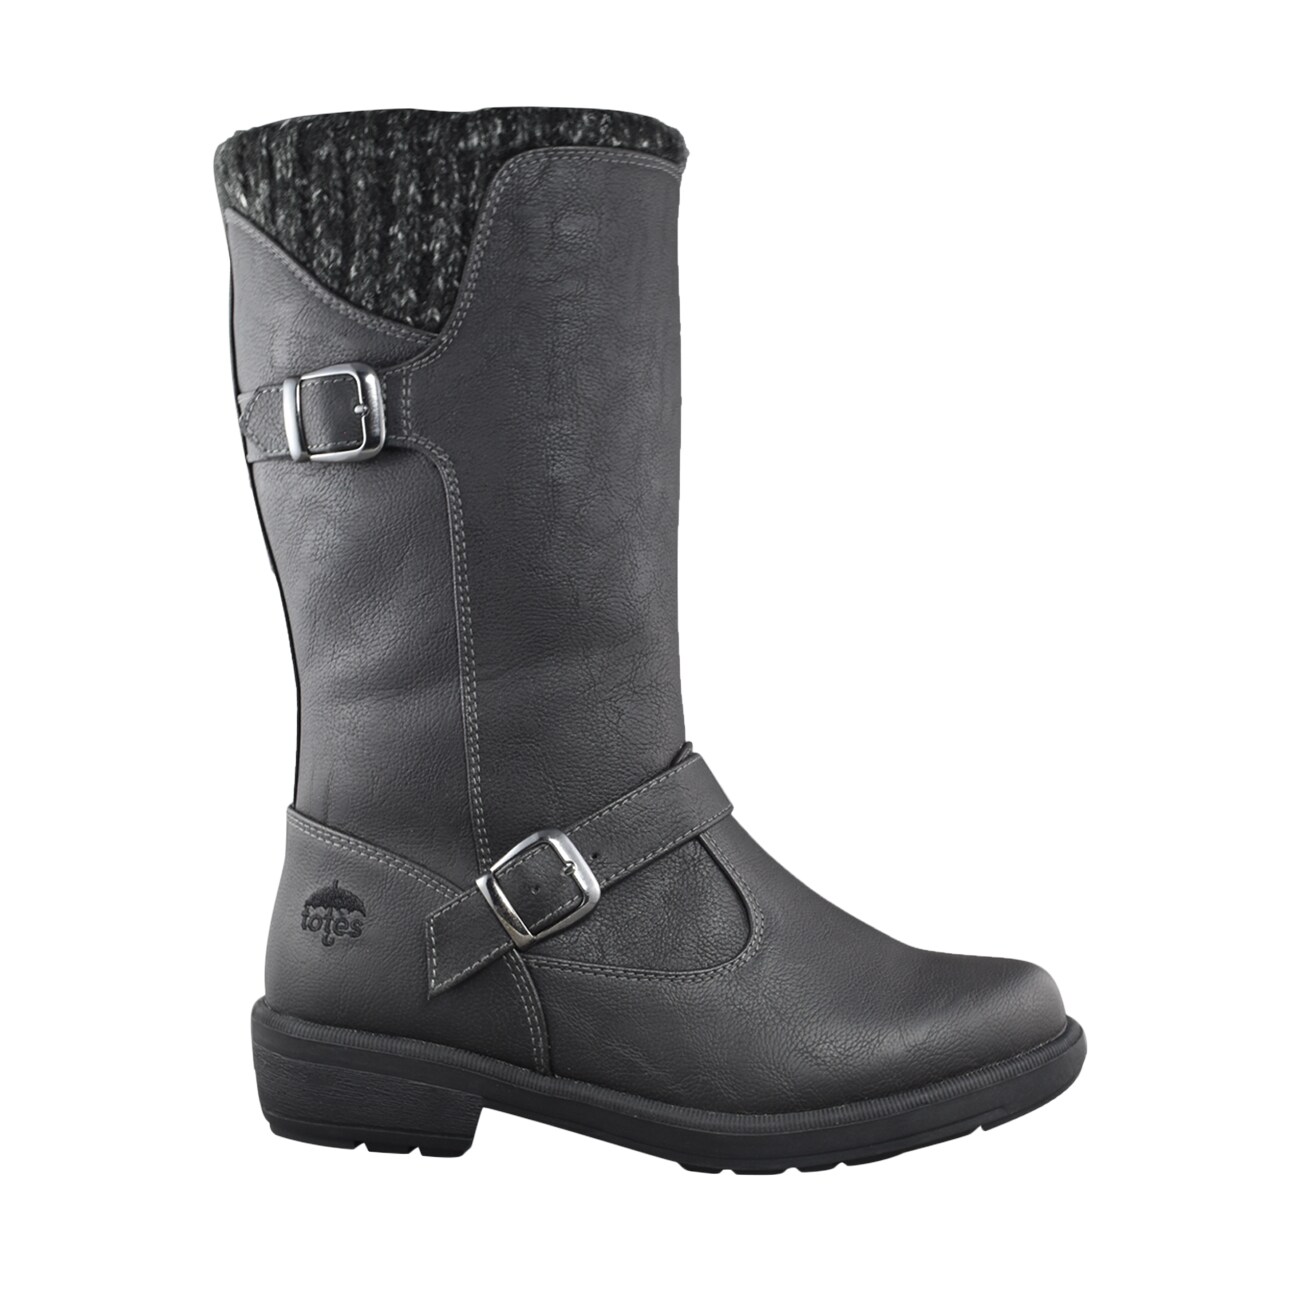 TOTES Gannet Winter Boot | DSW Canada